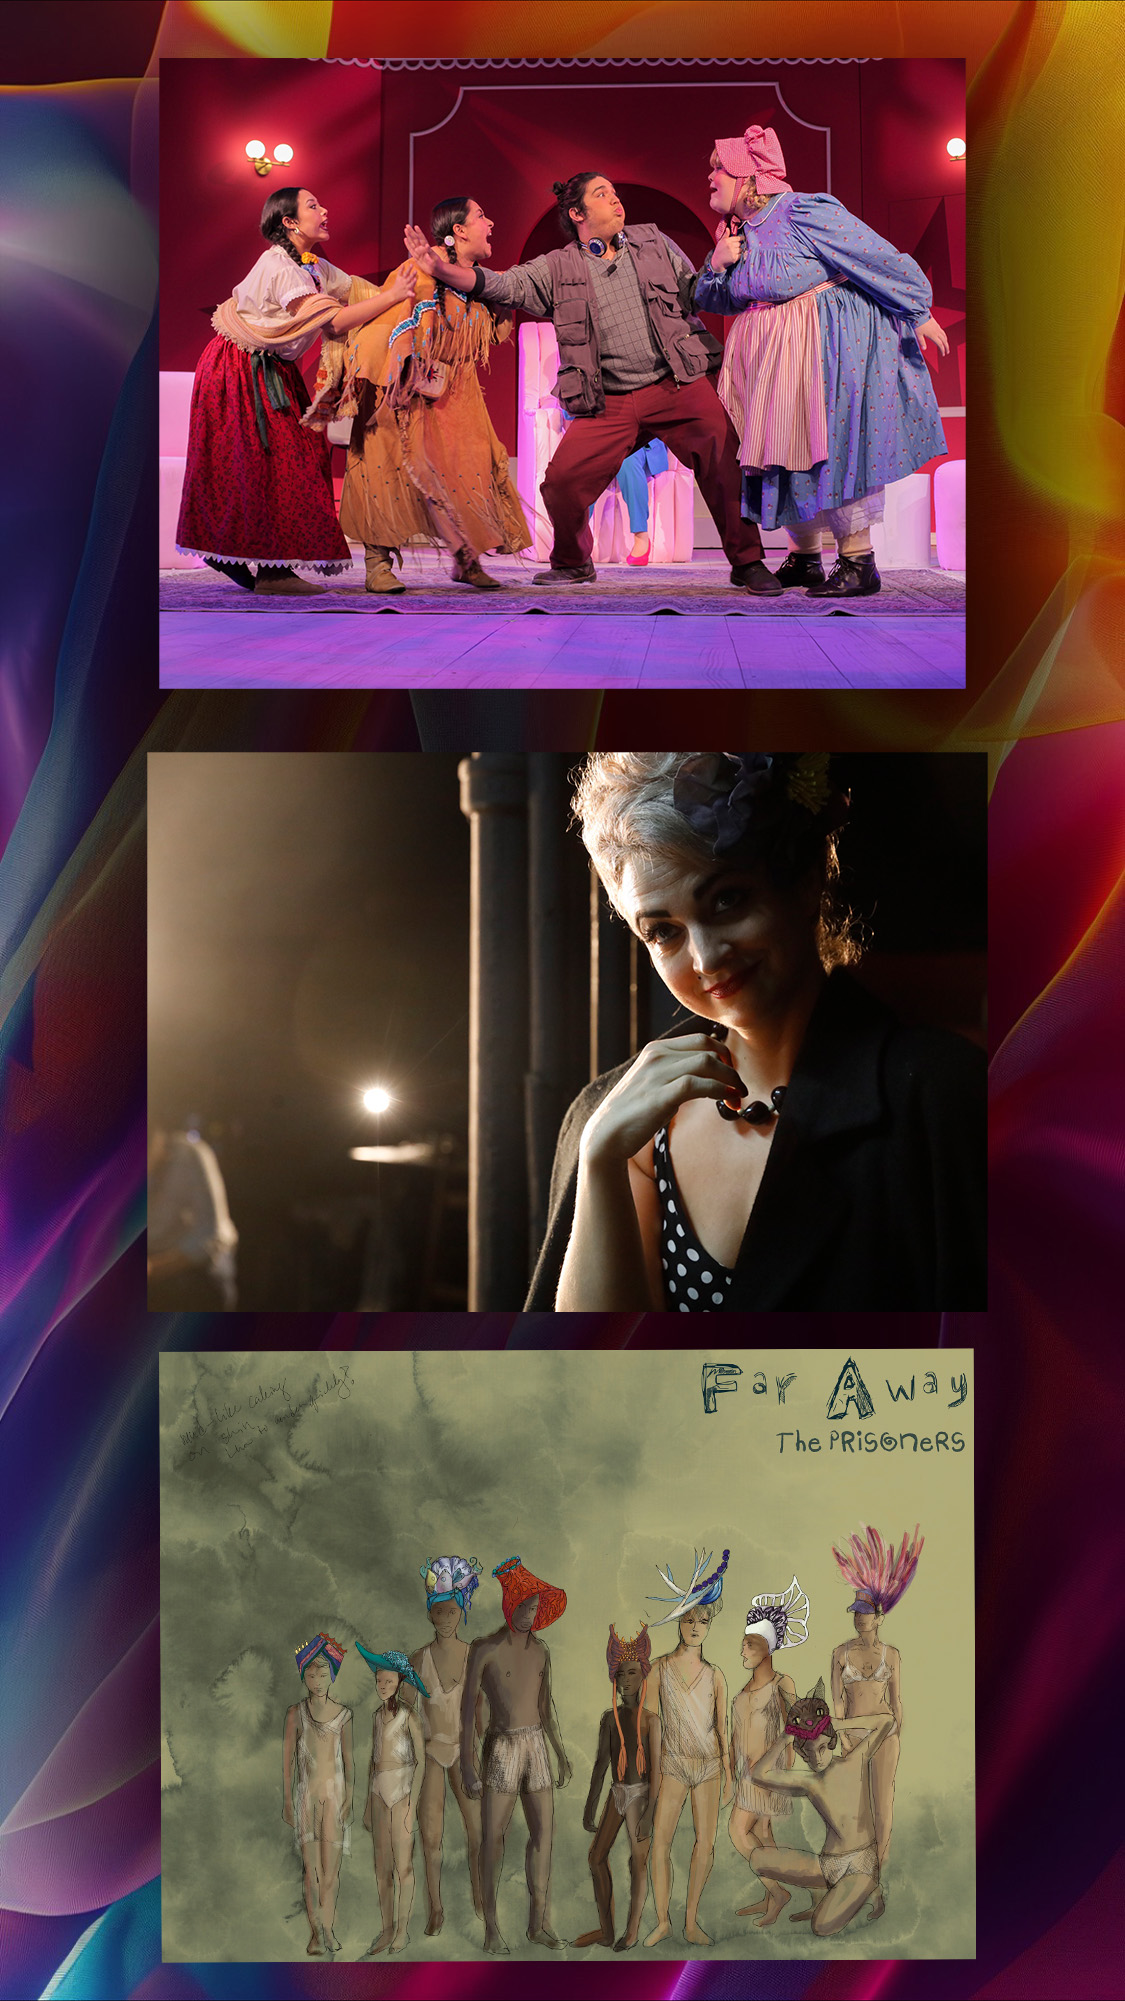 Three photos in a multicolored feild. The first image is of three women accosting a man in a stage play. The three women are dressed as a historical Mexican woman. An indigenous woman and a colonial woman respectively. The man is a stage manger in pants and a vest. THe second image is of a blond woman in a black and white polka dot dress. It is a cinematic still. The last image is a beautiful costume rendering of a group of children in undergarments with ornate and colorful hats. 